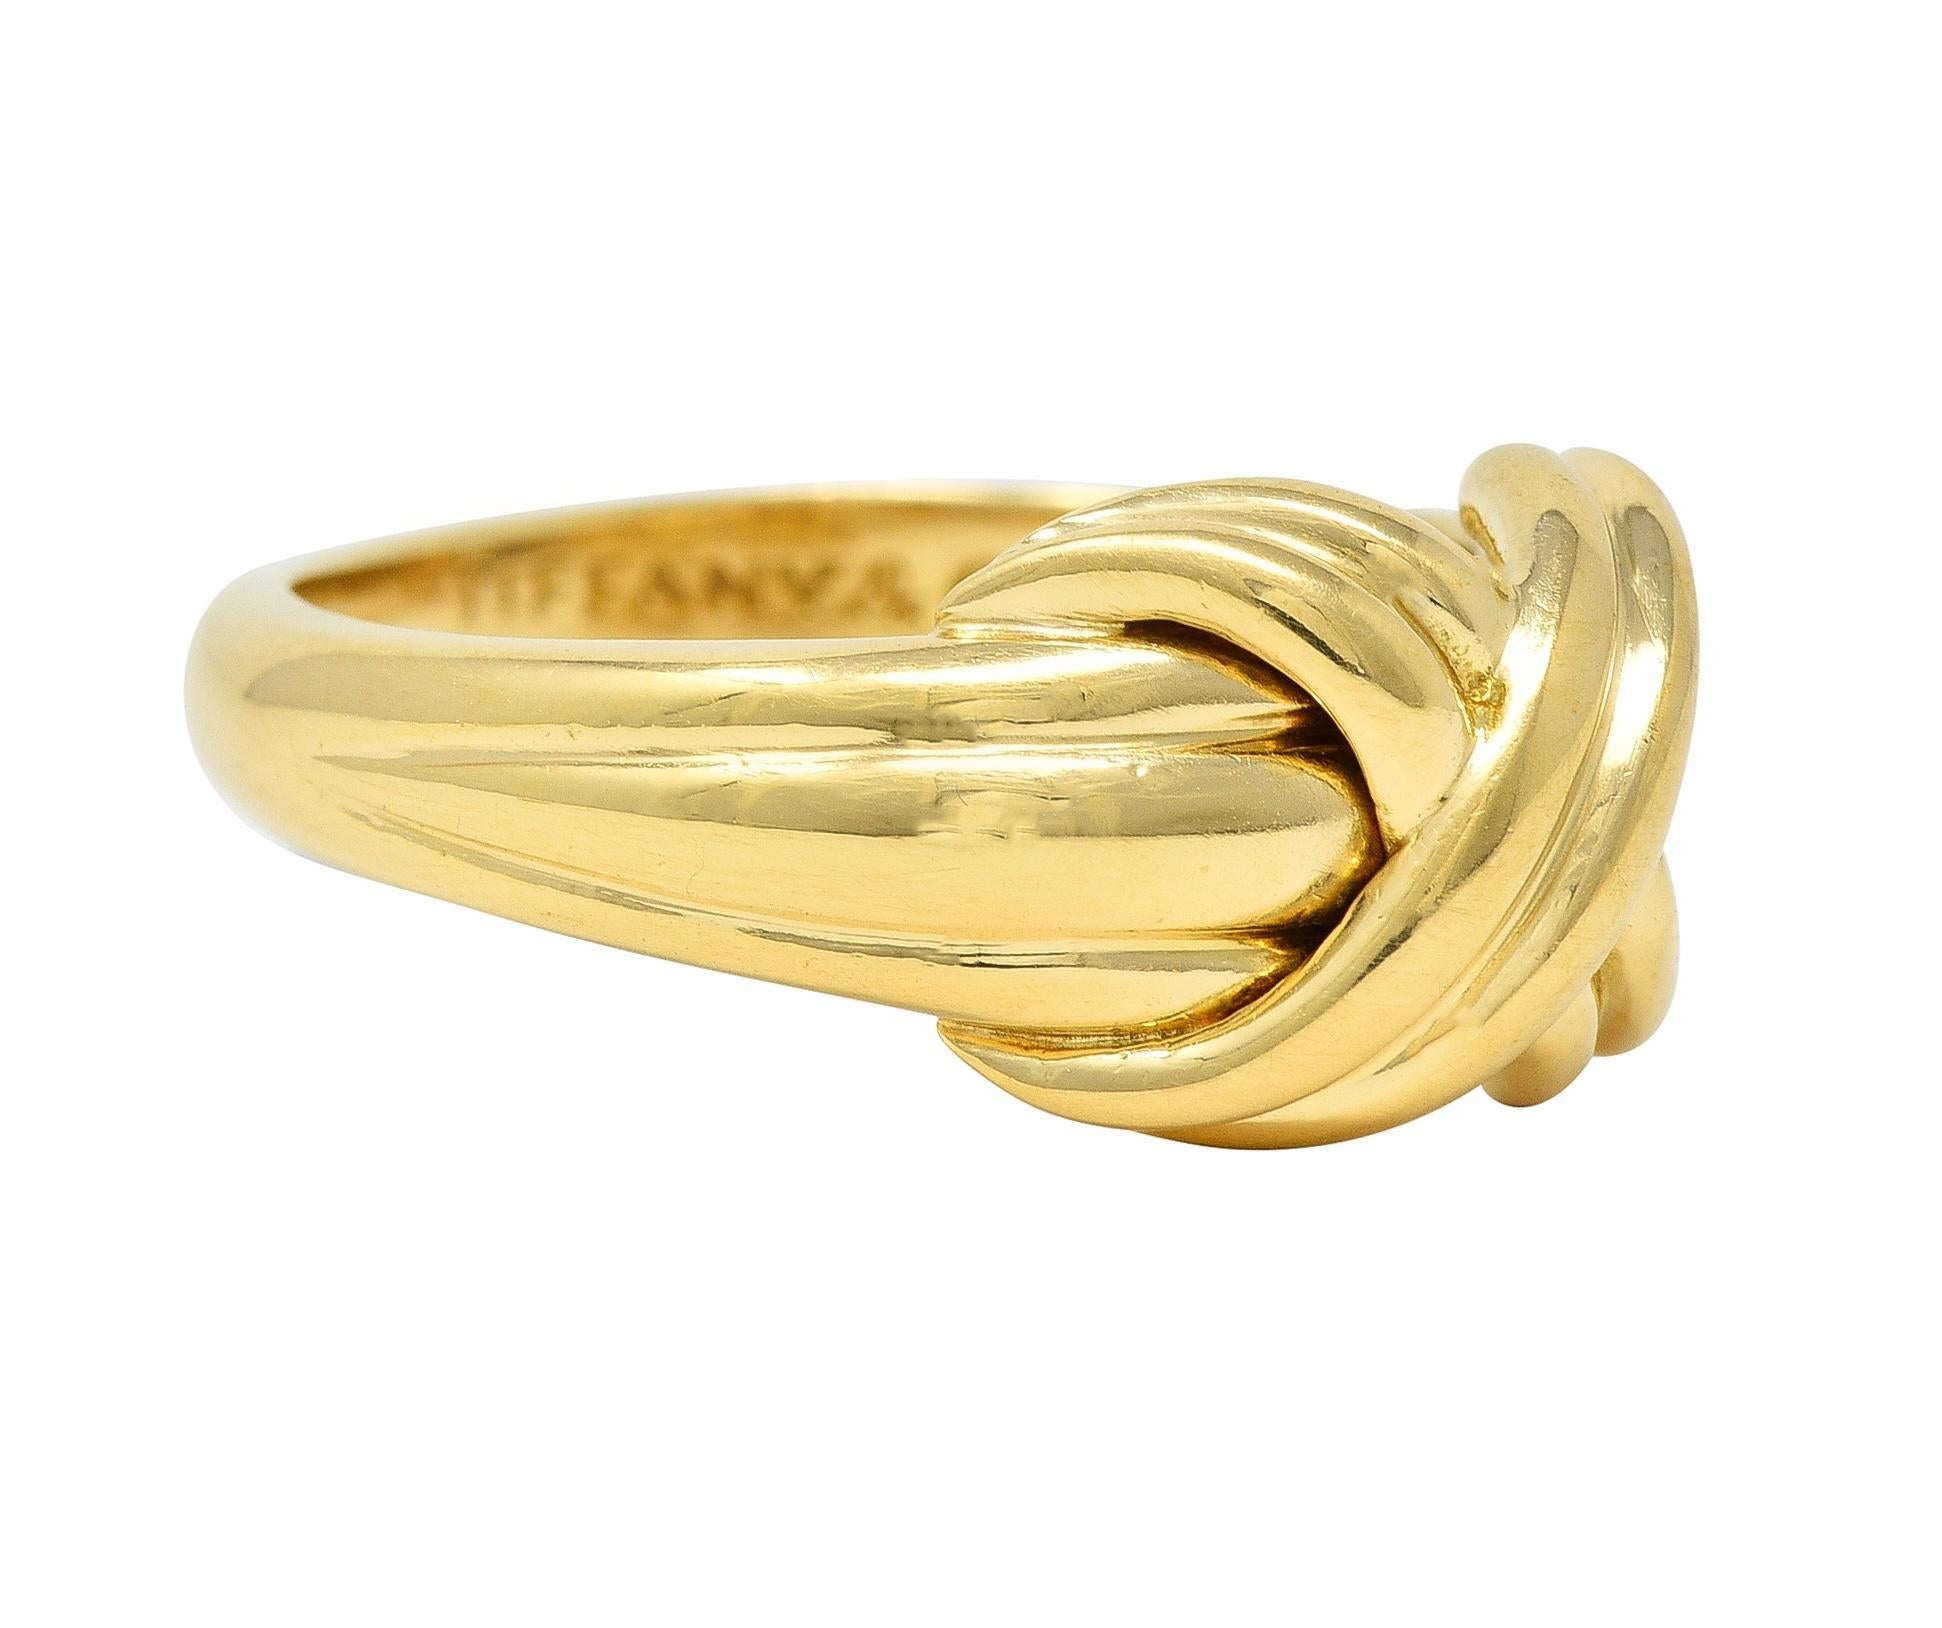 Designed as a tied fabric knot with grooved detail
Centering an 'X' motif 
With high polish finish 
Stamped for 18 karat gold 
Fully signed Tiffany & Co.
Circa: 1990; via dated inscription 
Ring size: 5 1/2 and not sizable 
Measures north to south